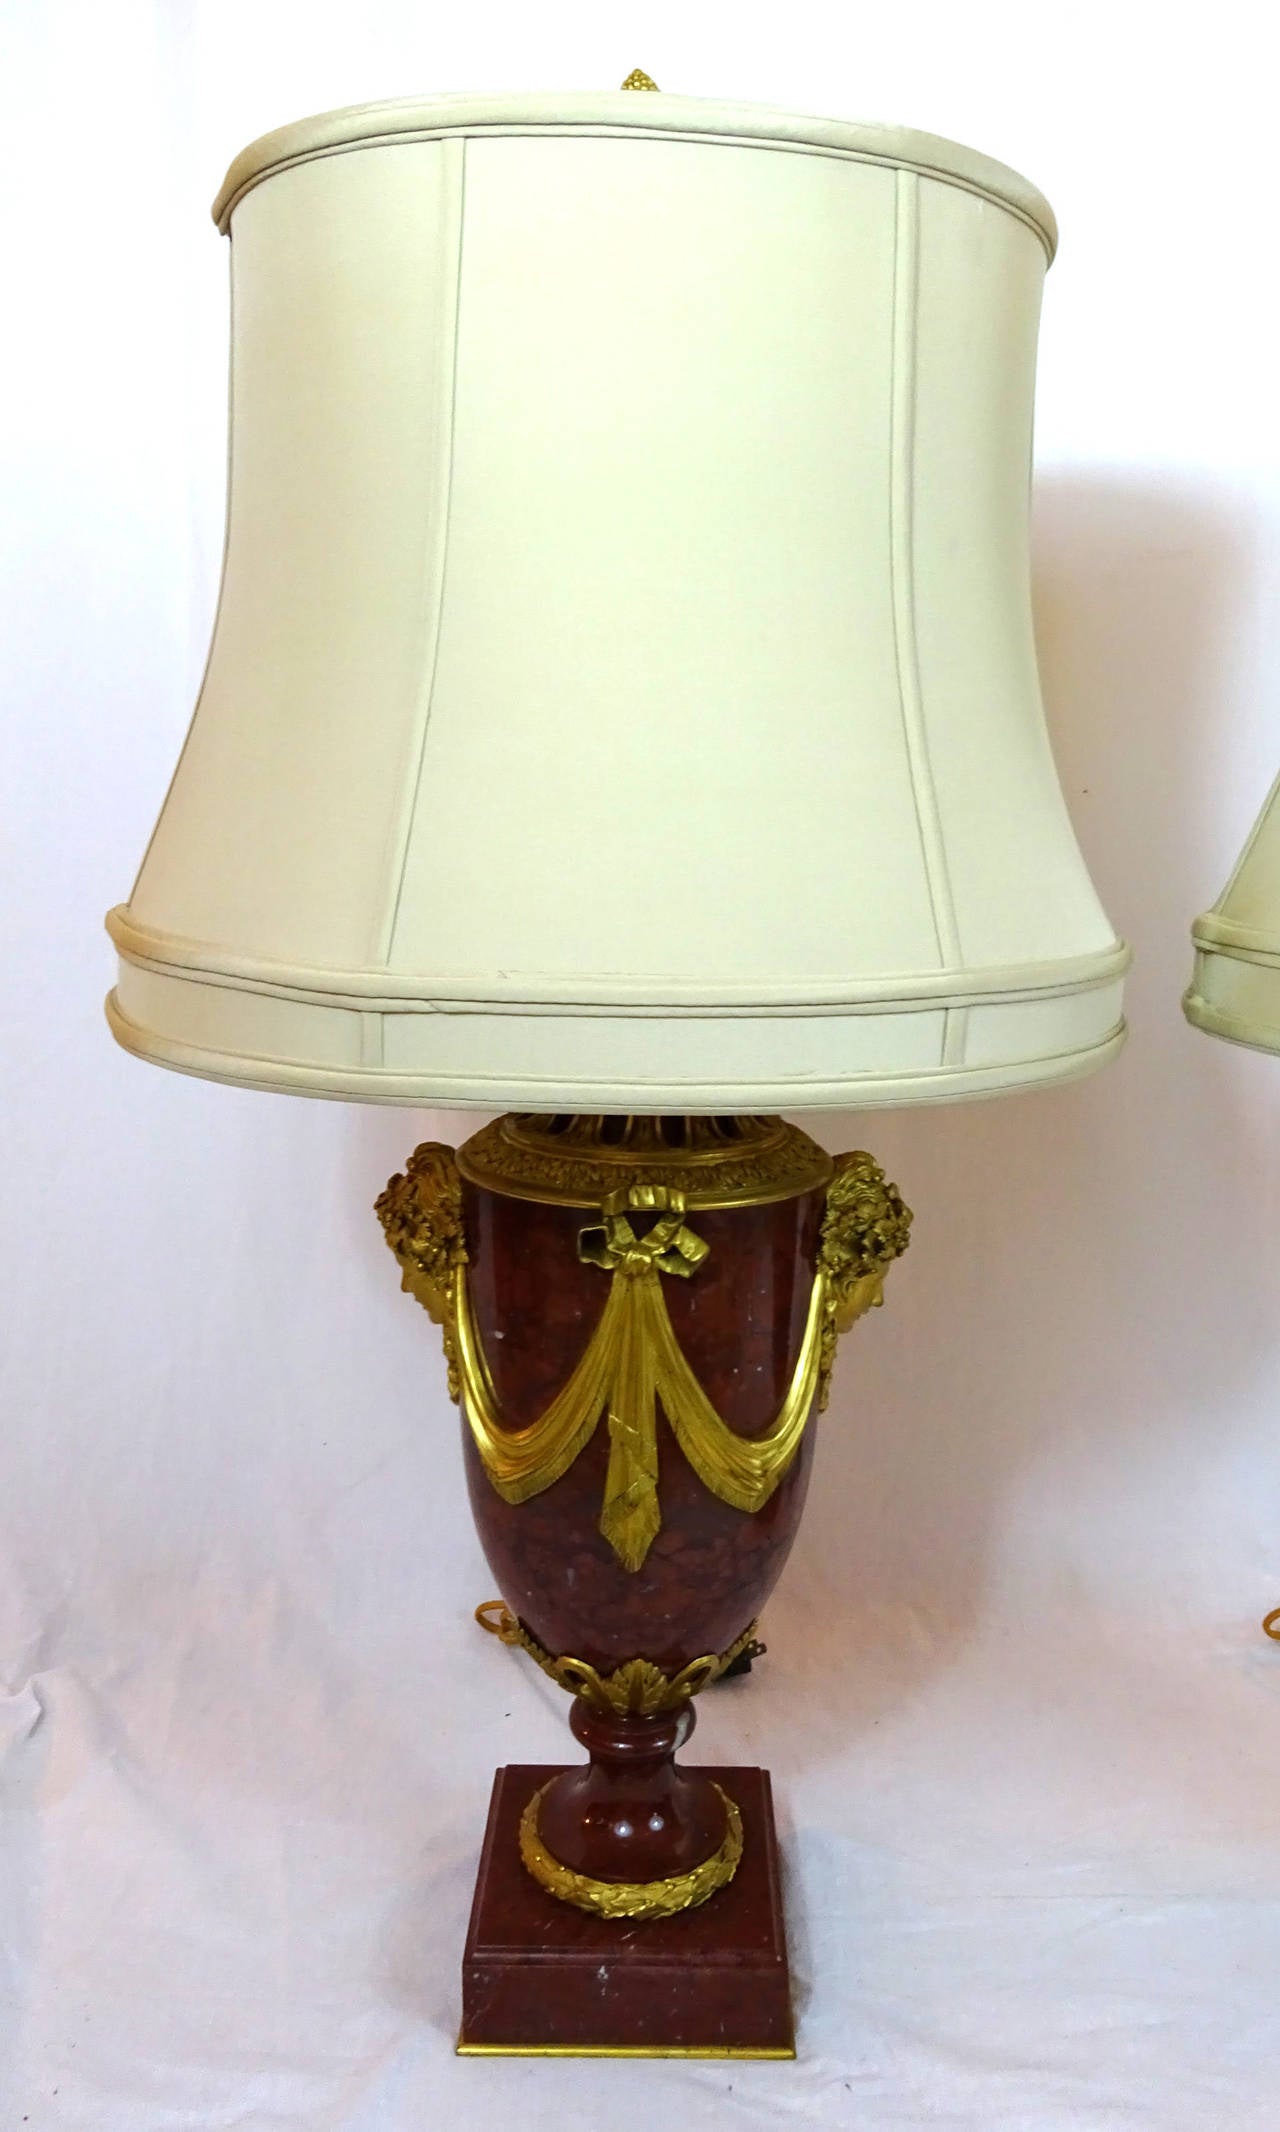 Pair of 19th century French red marble lamps with ormolu masks and mounts.